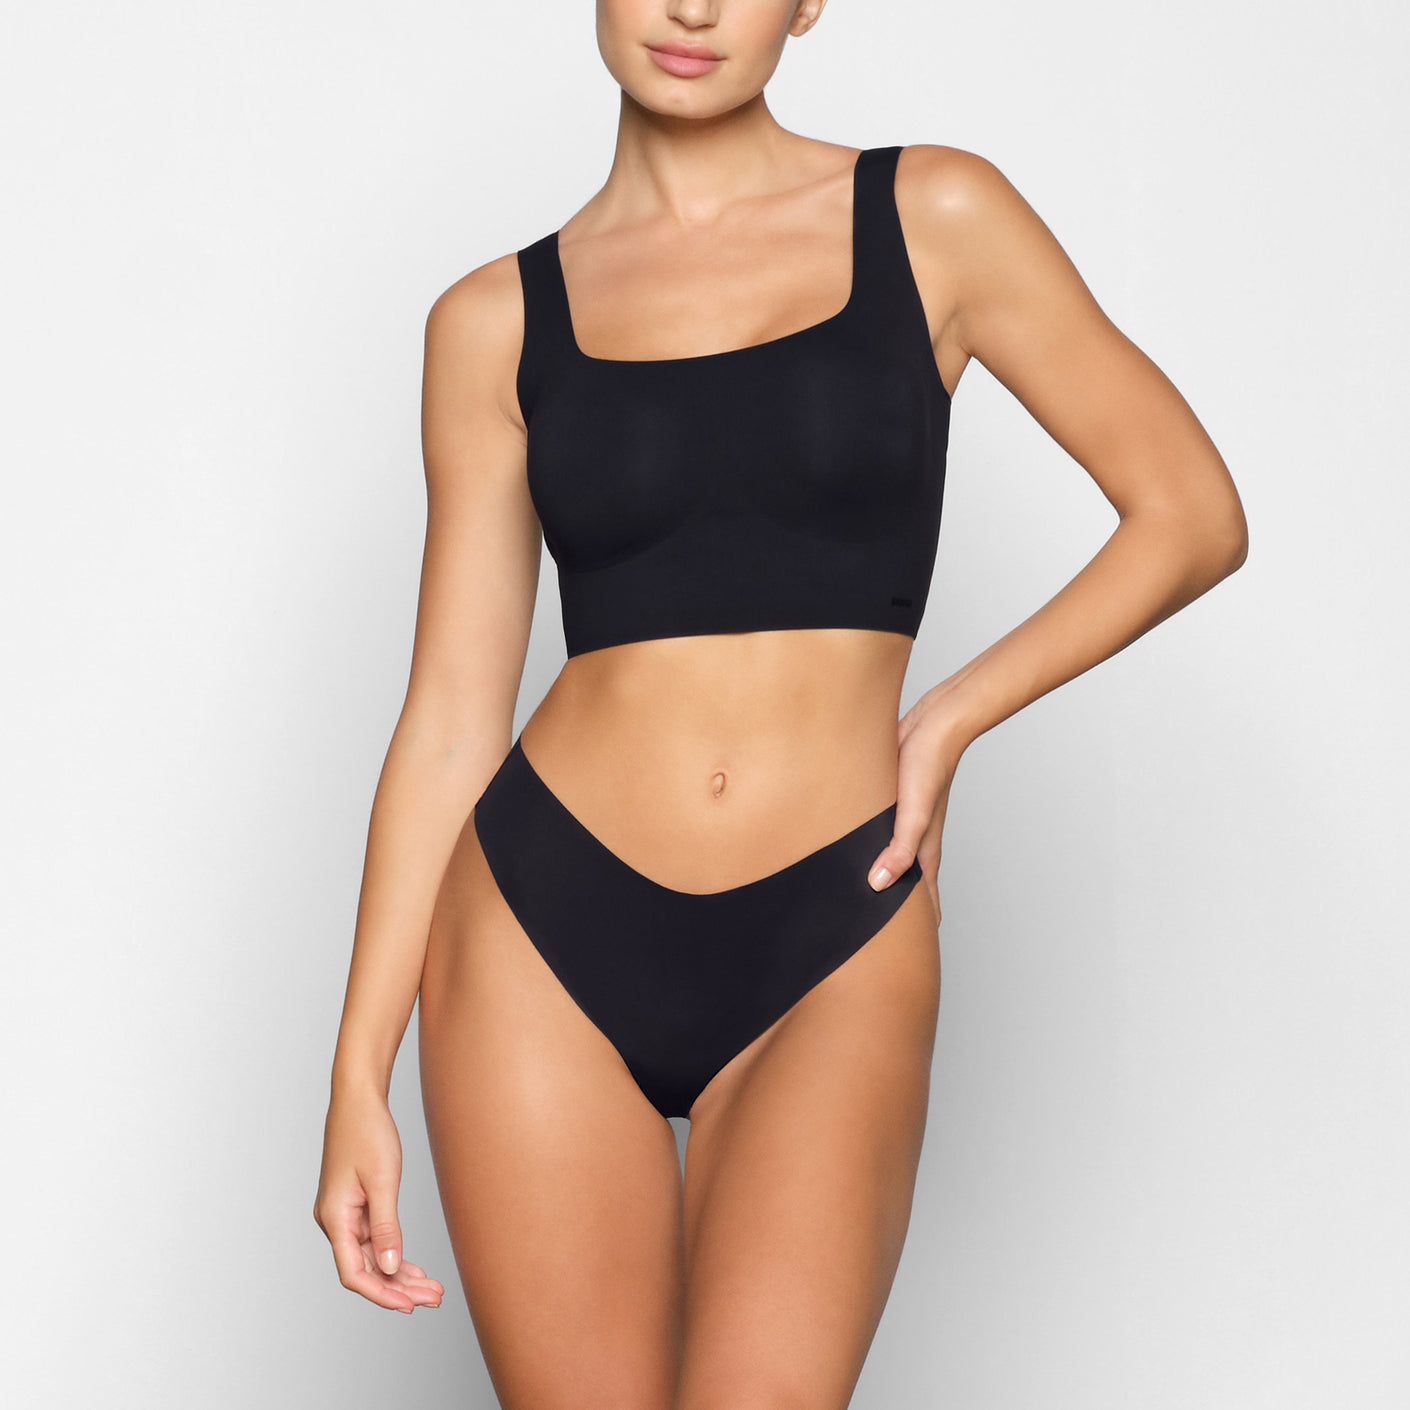 Skims Naked Scoop Bra (1 stores) see best prices now »